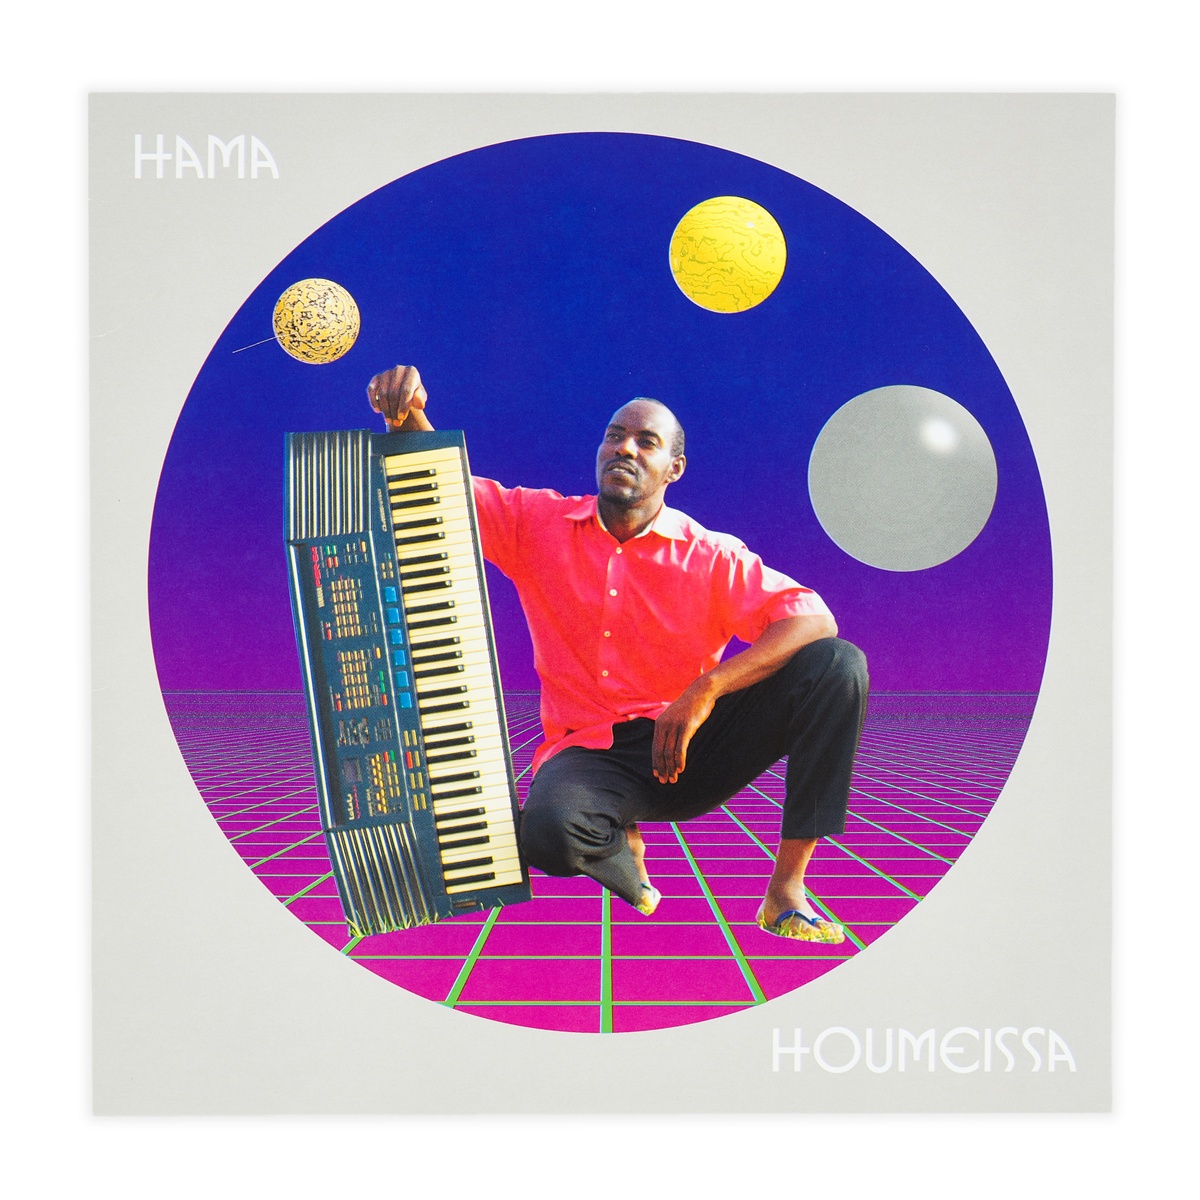 Photograph of the cover of HAMA's 12" vinyl record 'Houmeissa'.
